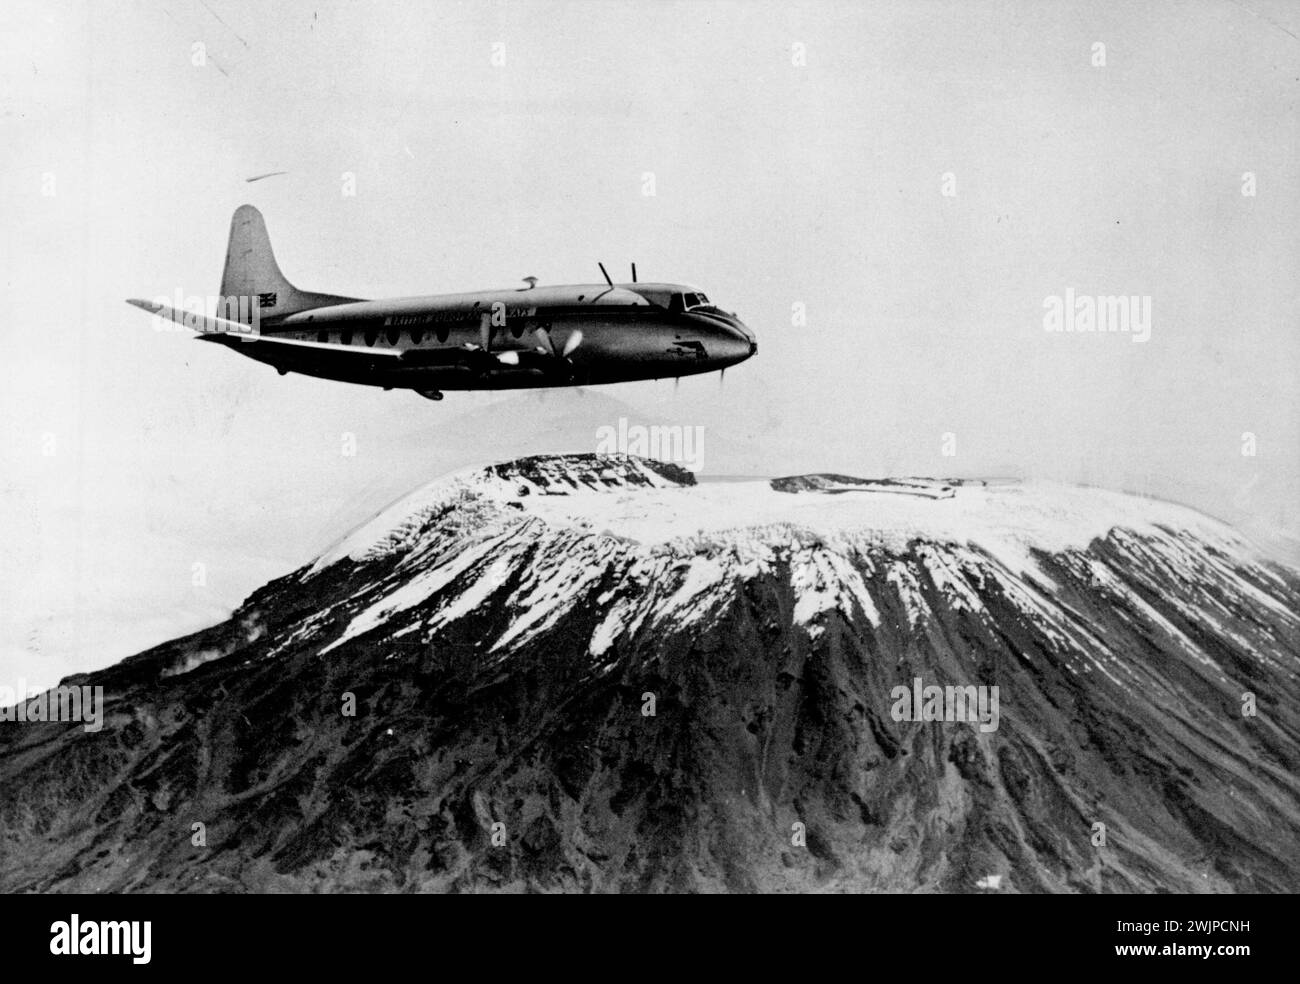 Altitude Test First turbo-prop airliner to fly in Africa, the Vickers Viscount, undergoes high altitude trails over Mount Kilimanjaro, East Africa. This picture was taken from another aircraft. June 27, 1950. (Photo by Fox Photos). Stock Photo